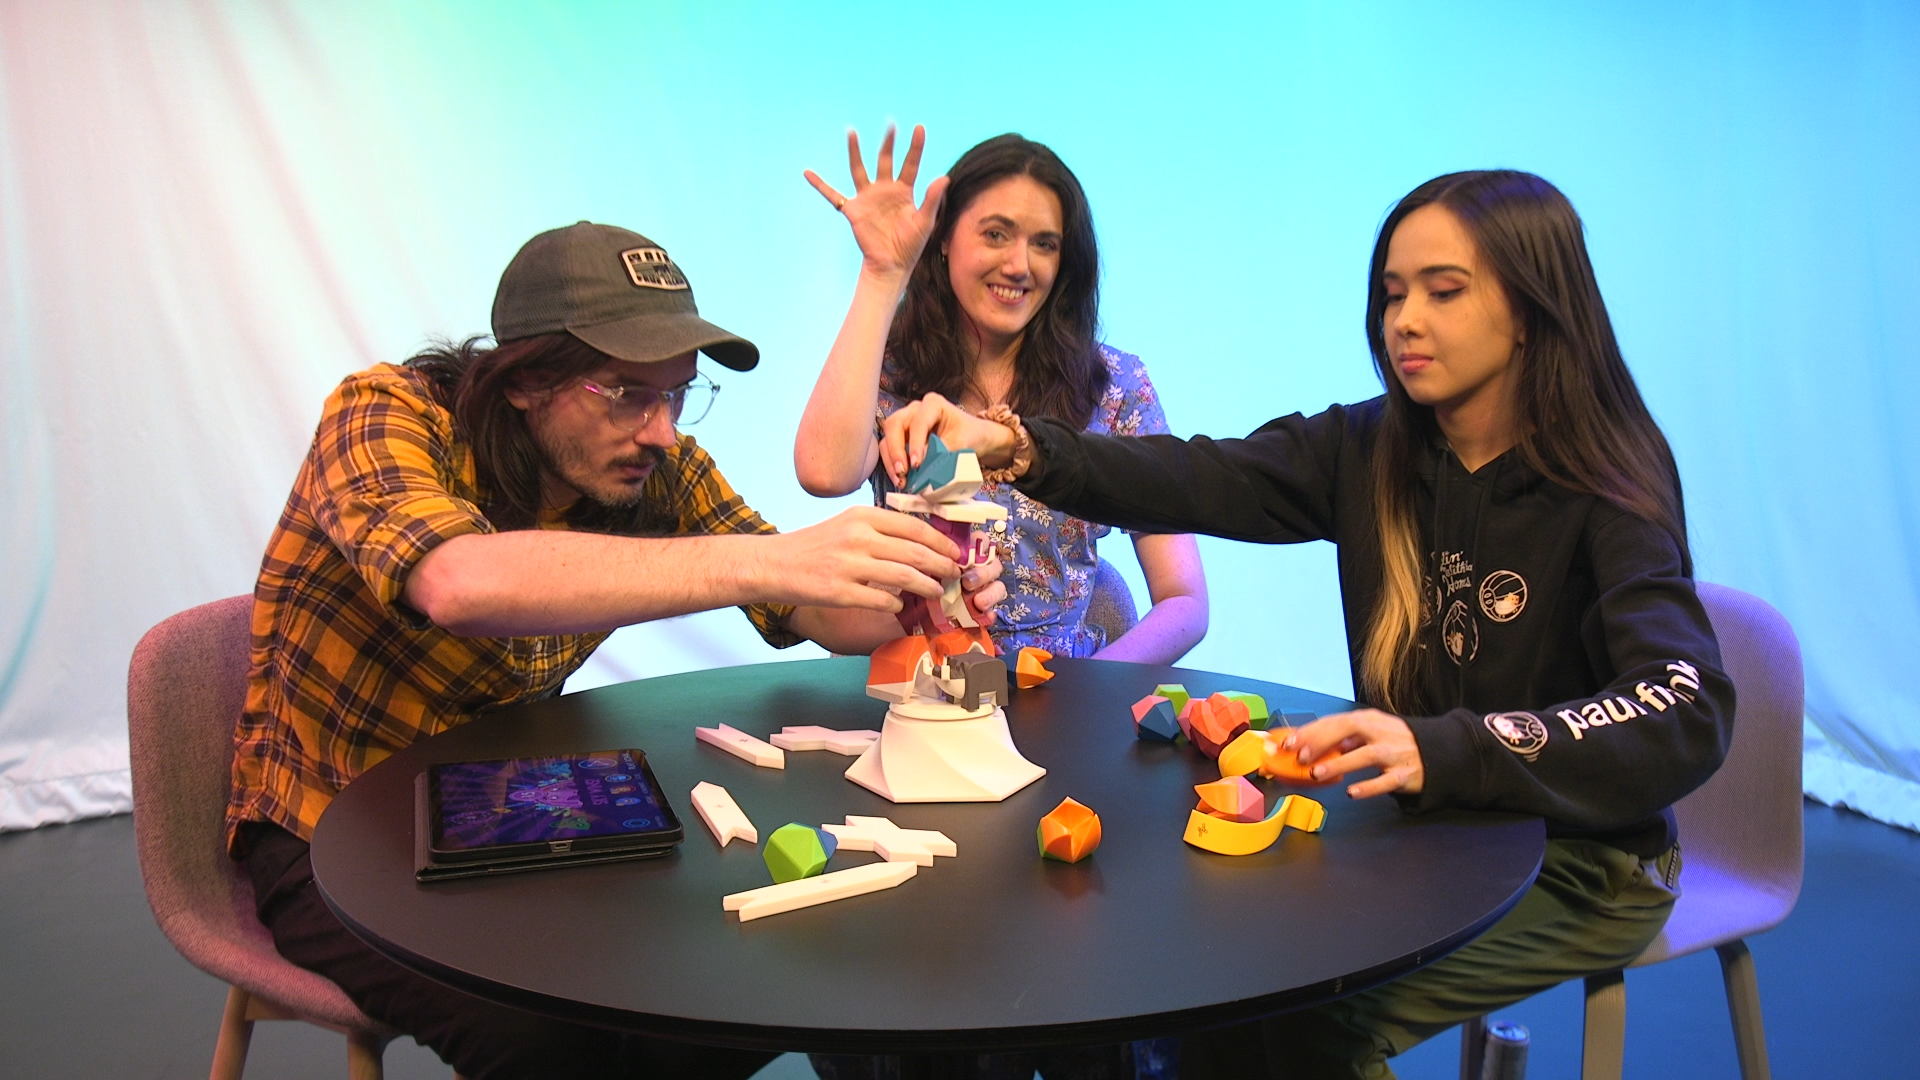 Three people sitting at a table with a colorful backdrop. Two players are stacking animal shaped blocks in the game Beasts of Balance while one waves at the camera.